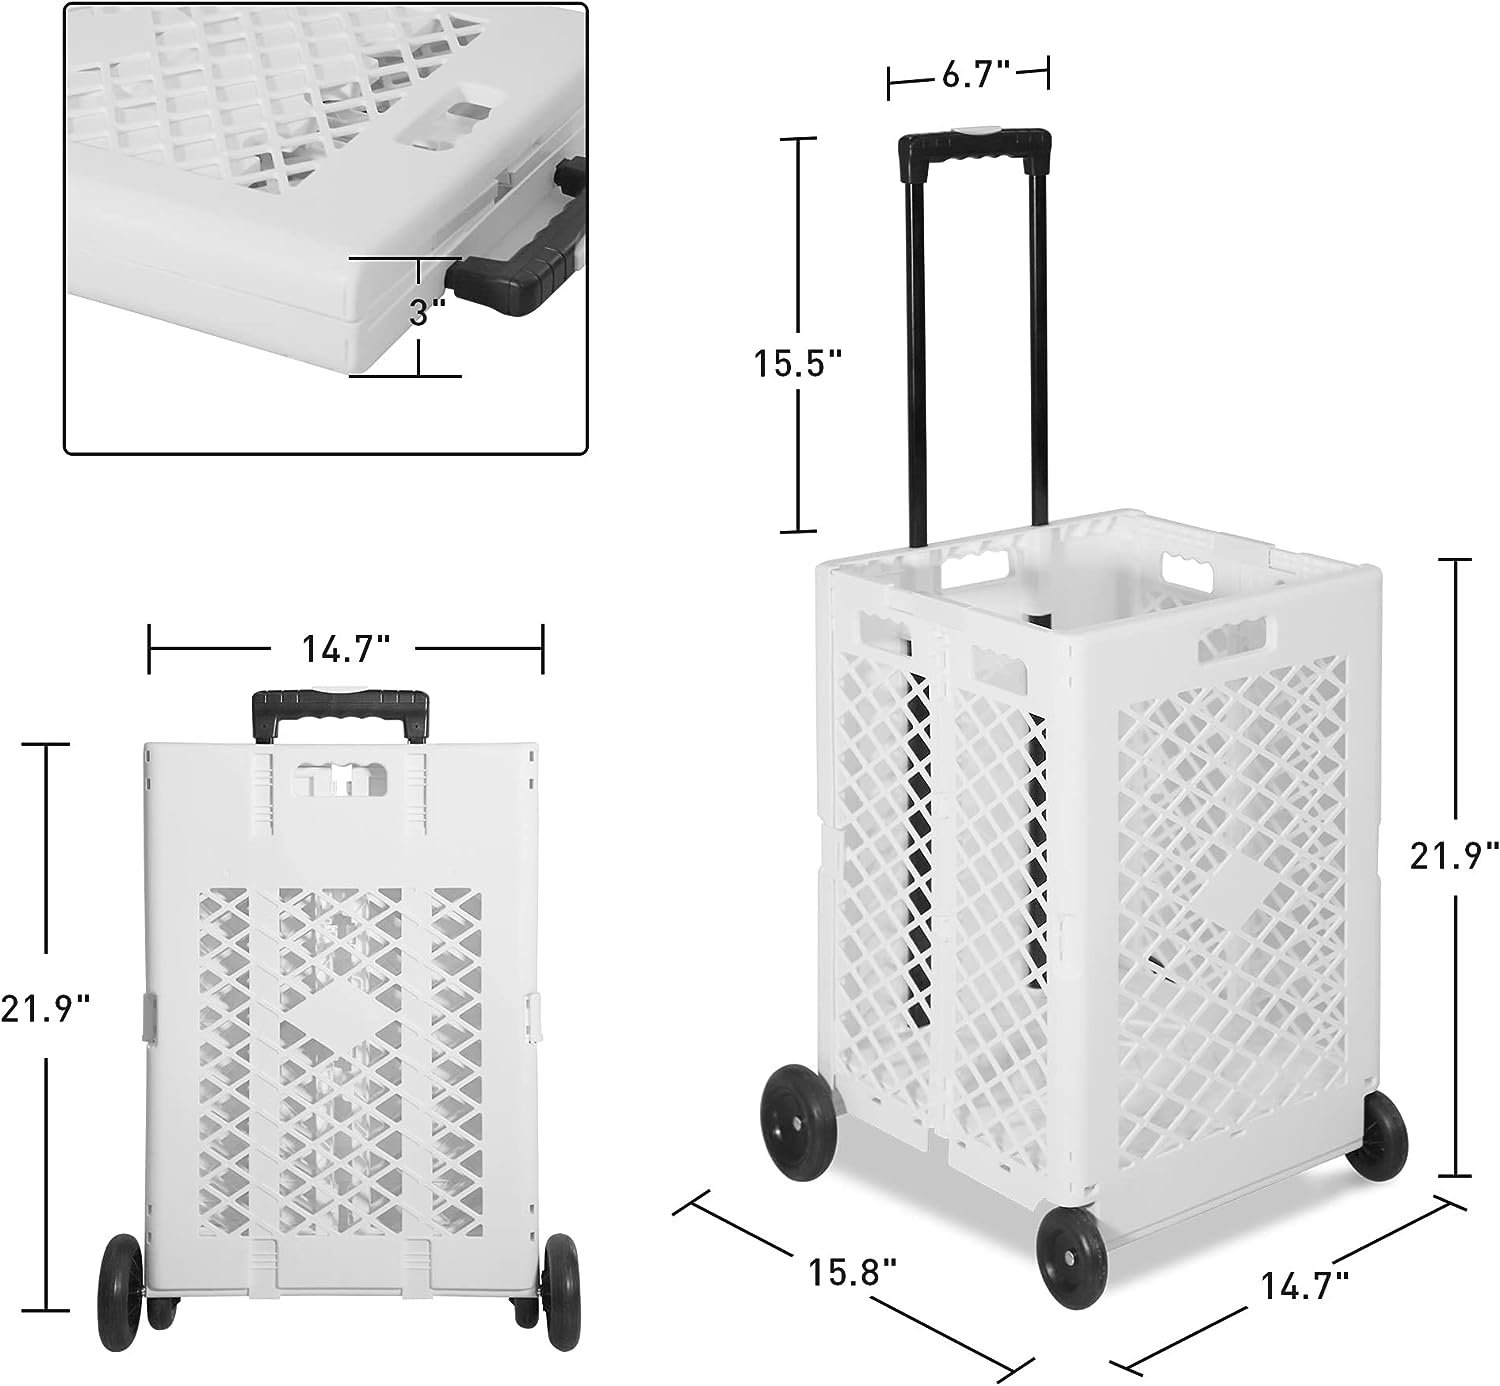 LUCKYERMORE 66lbs Capacity Foldable Rolling Crate with Wheels Collapsible Basket Telescopic Handle, White